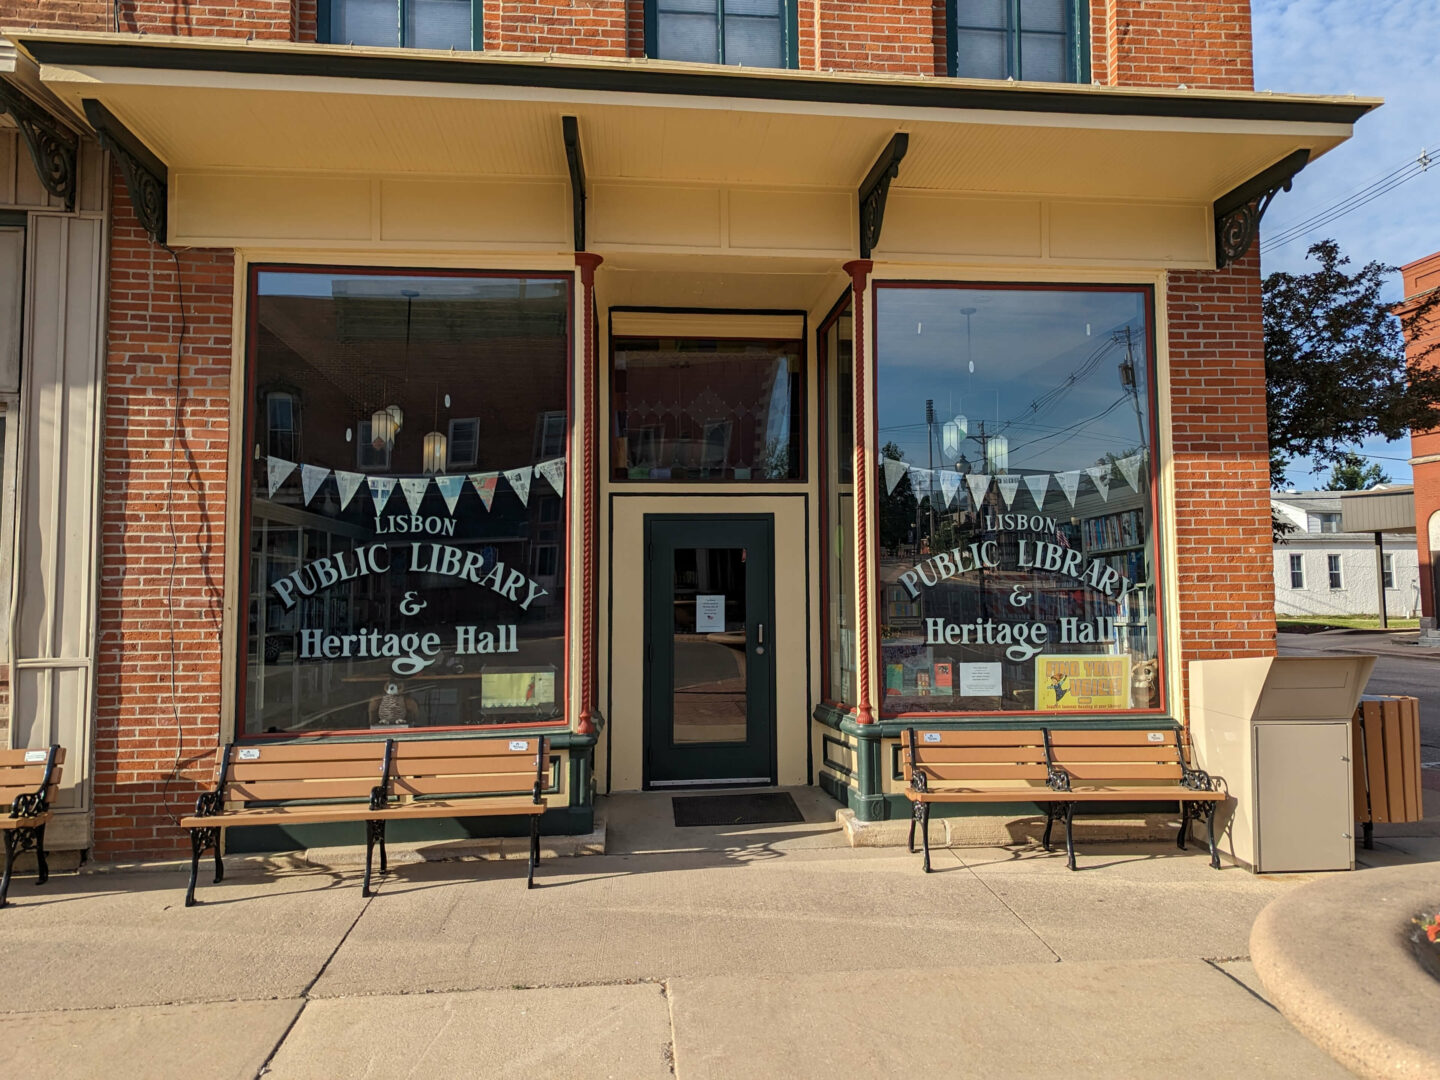 storefront of the Lisbon Public Library and Heritage Hall